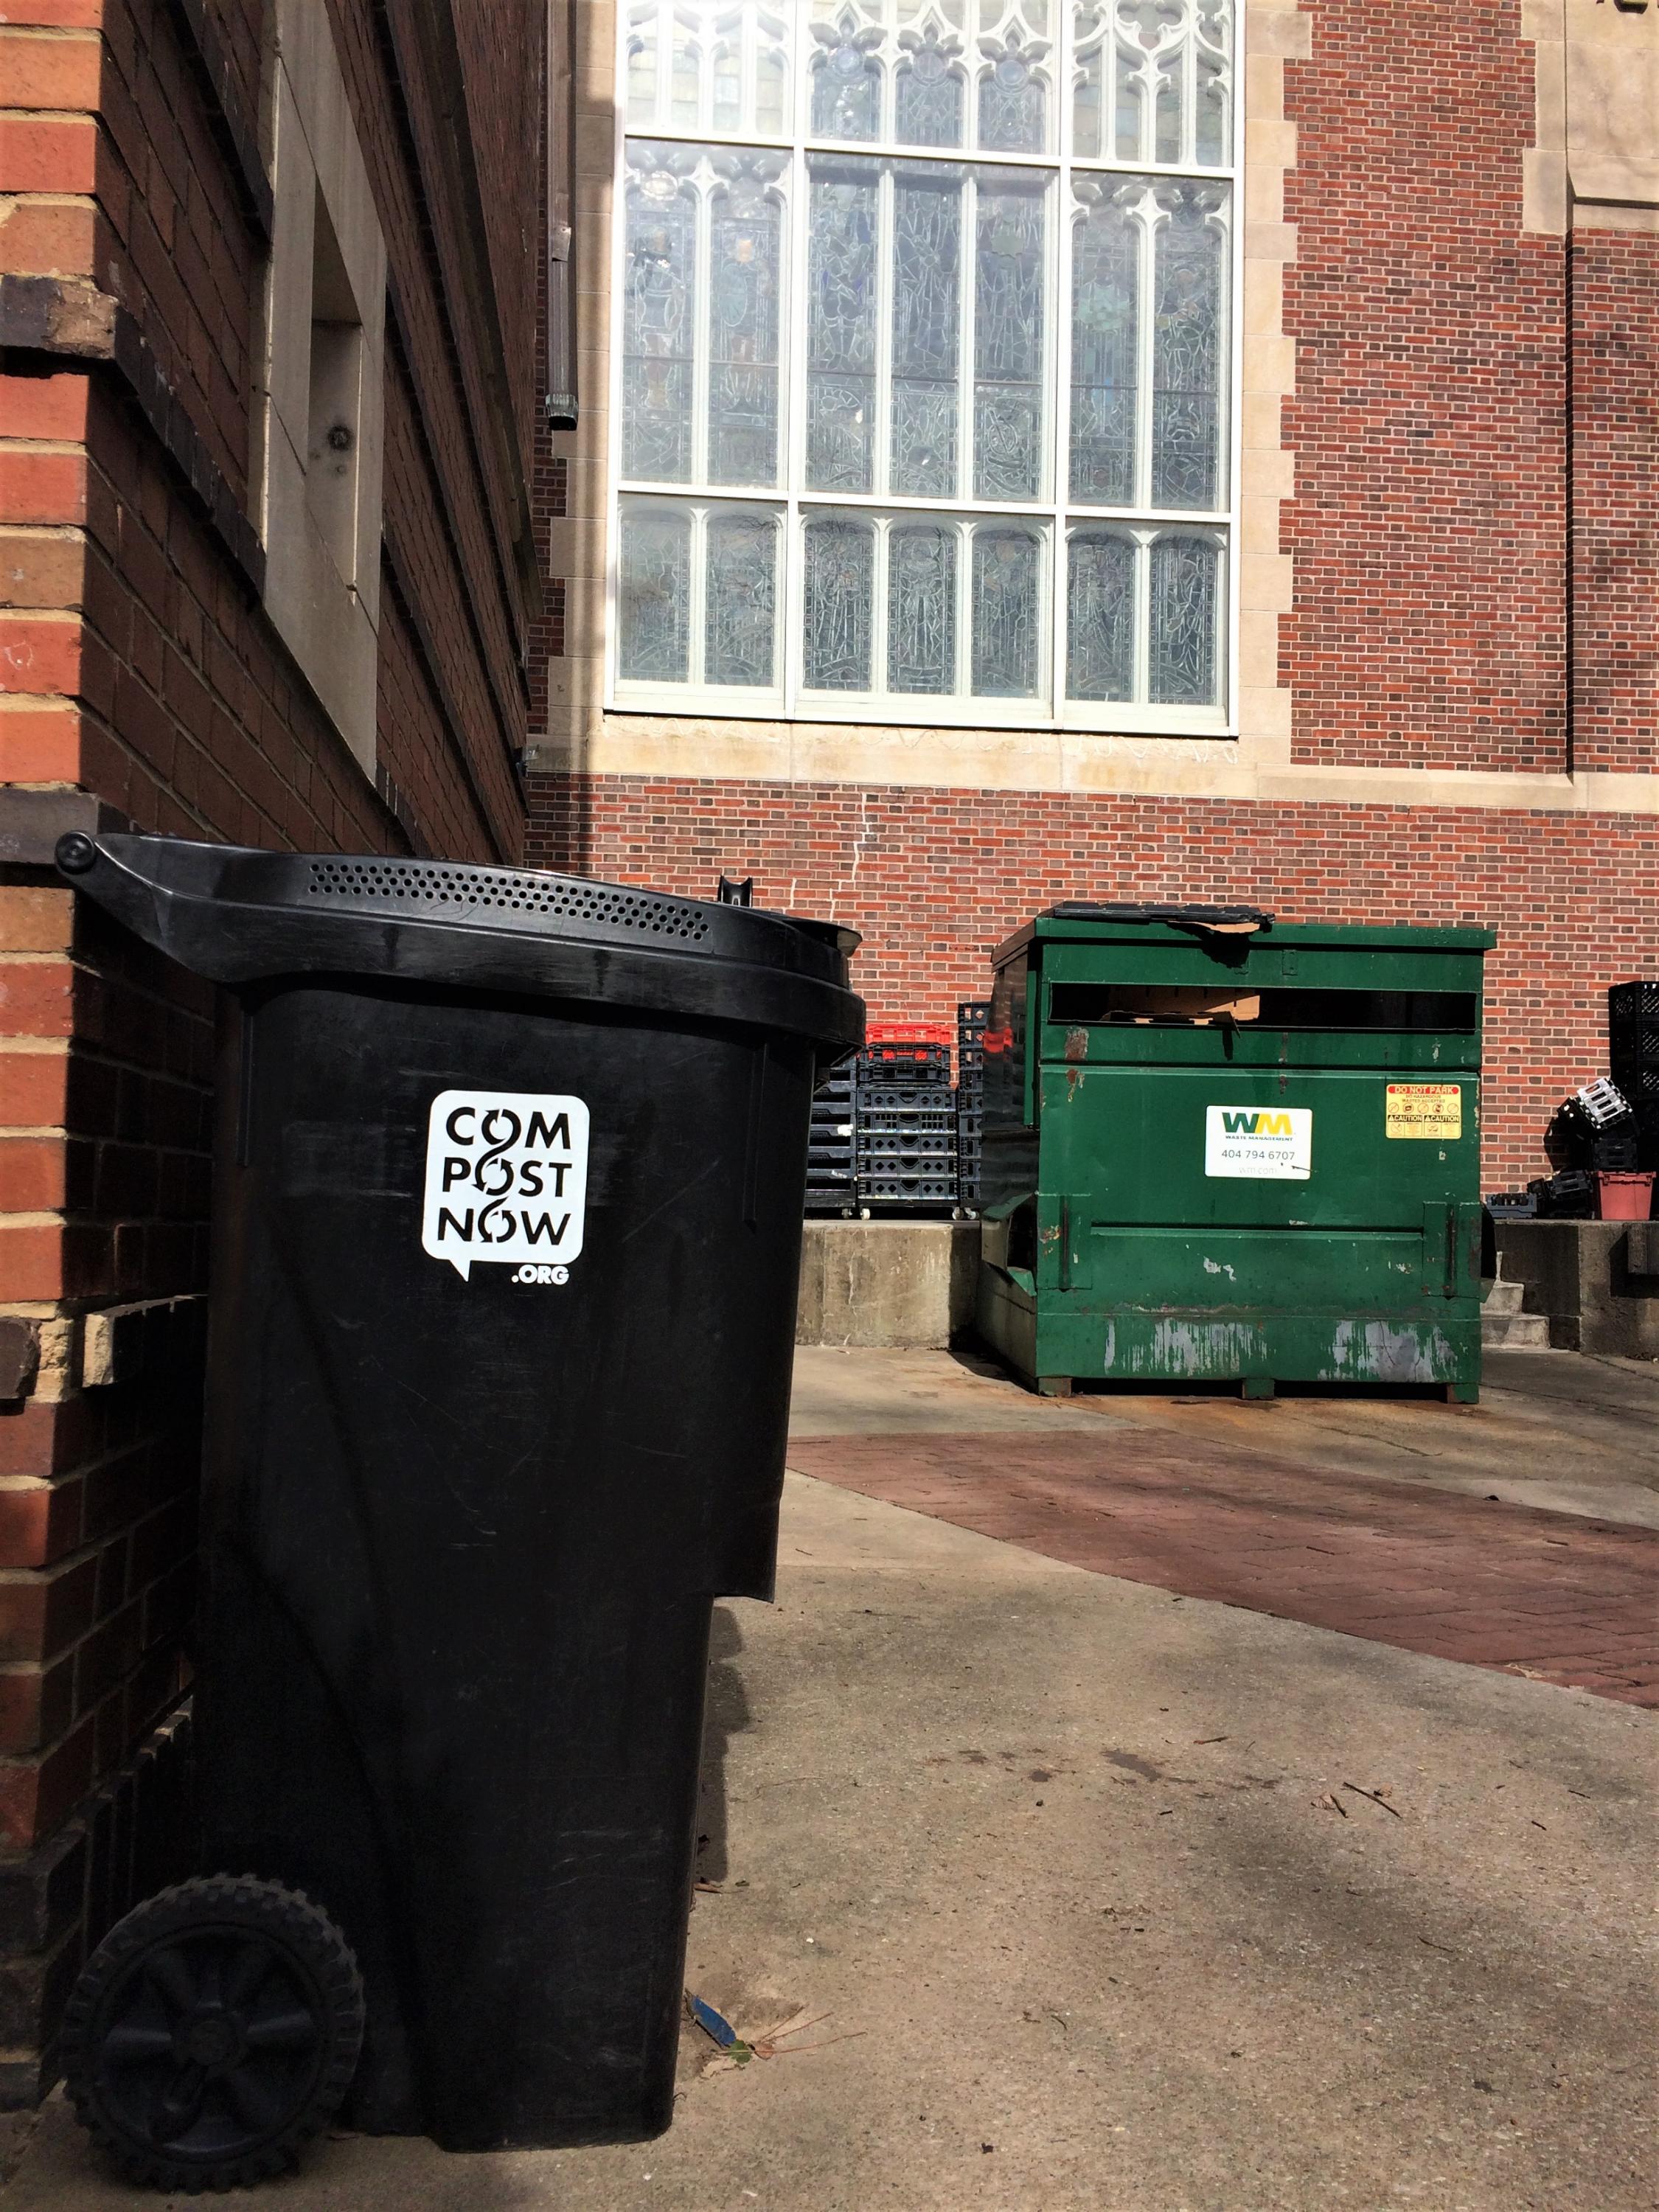 Larger composting bins are located outside of Cloudman, Brittain, and Hopkins next to the dumpsters. Any students on East Campus who are interested in collecting their own food scraps are encouraged to dispose of them in these receptacles.